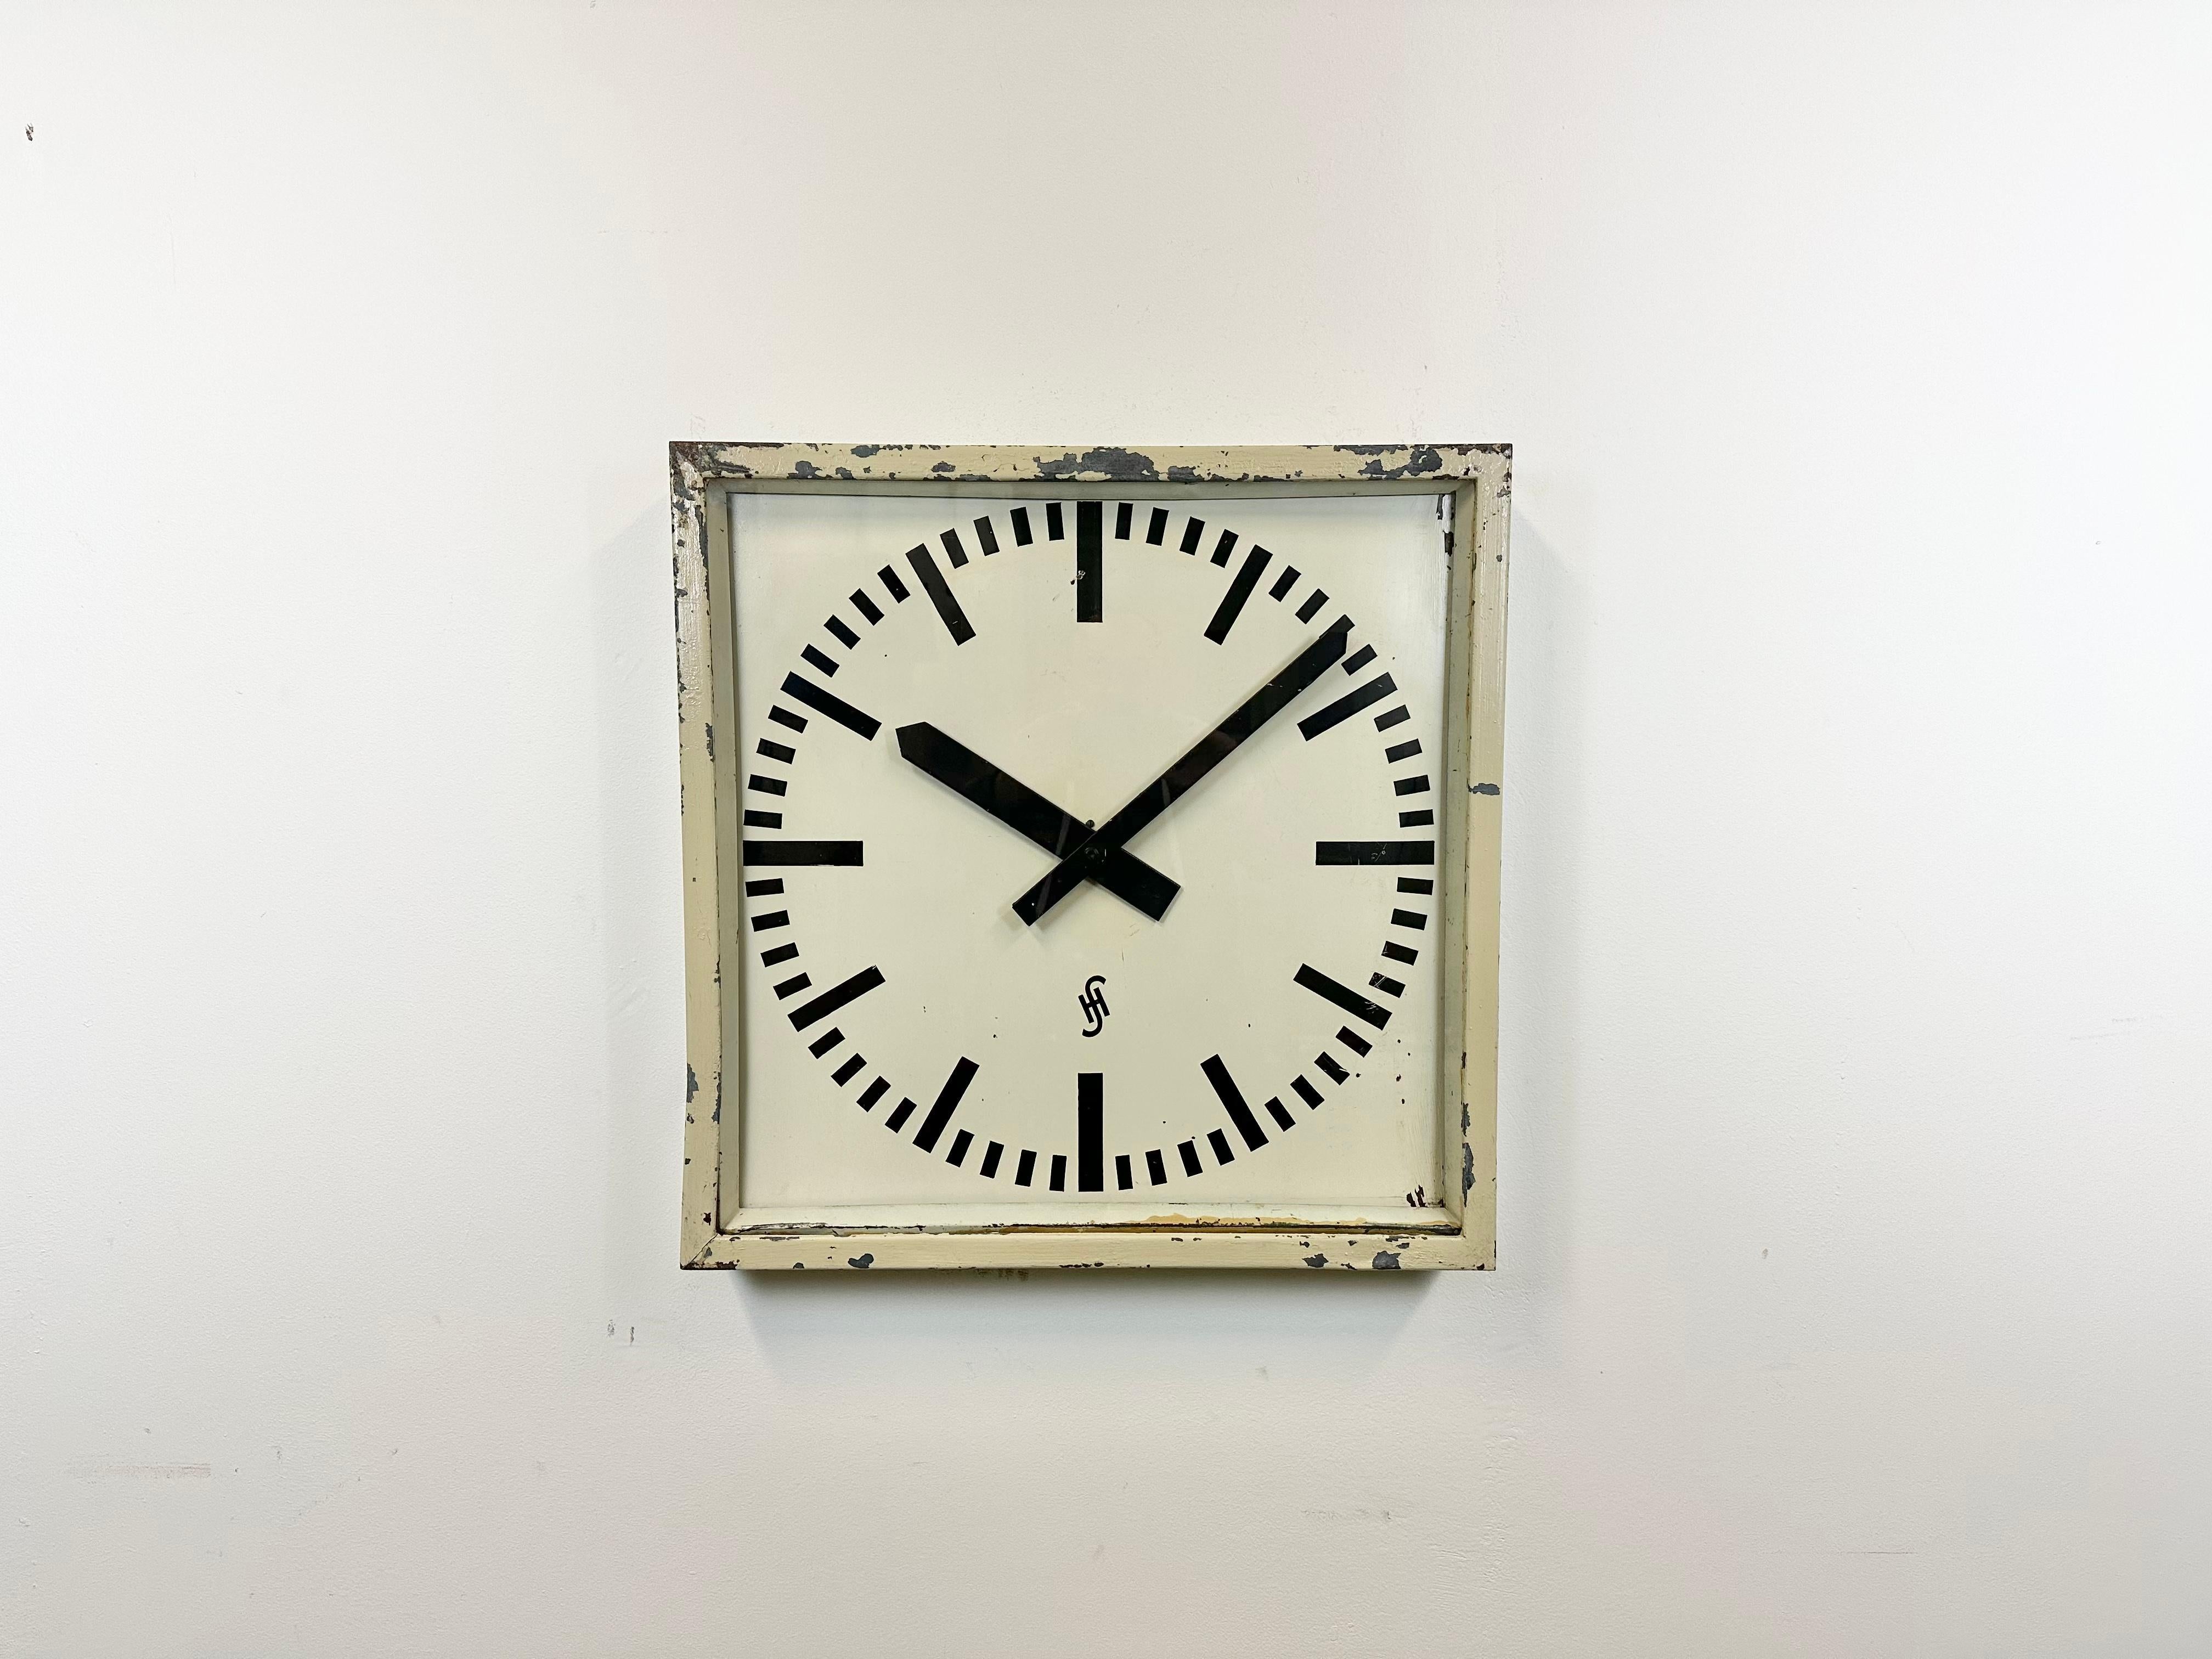 This large wall clock was produced by Siemens and Halske in Germany during the 1950s. It features a beige metal frame, an iron clockface, and a clear glass cover. The piece has been converted into a battery-powered clockwork and requires only one